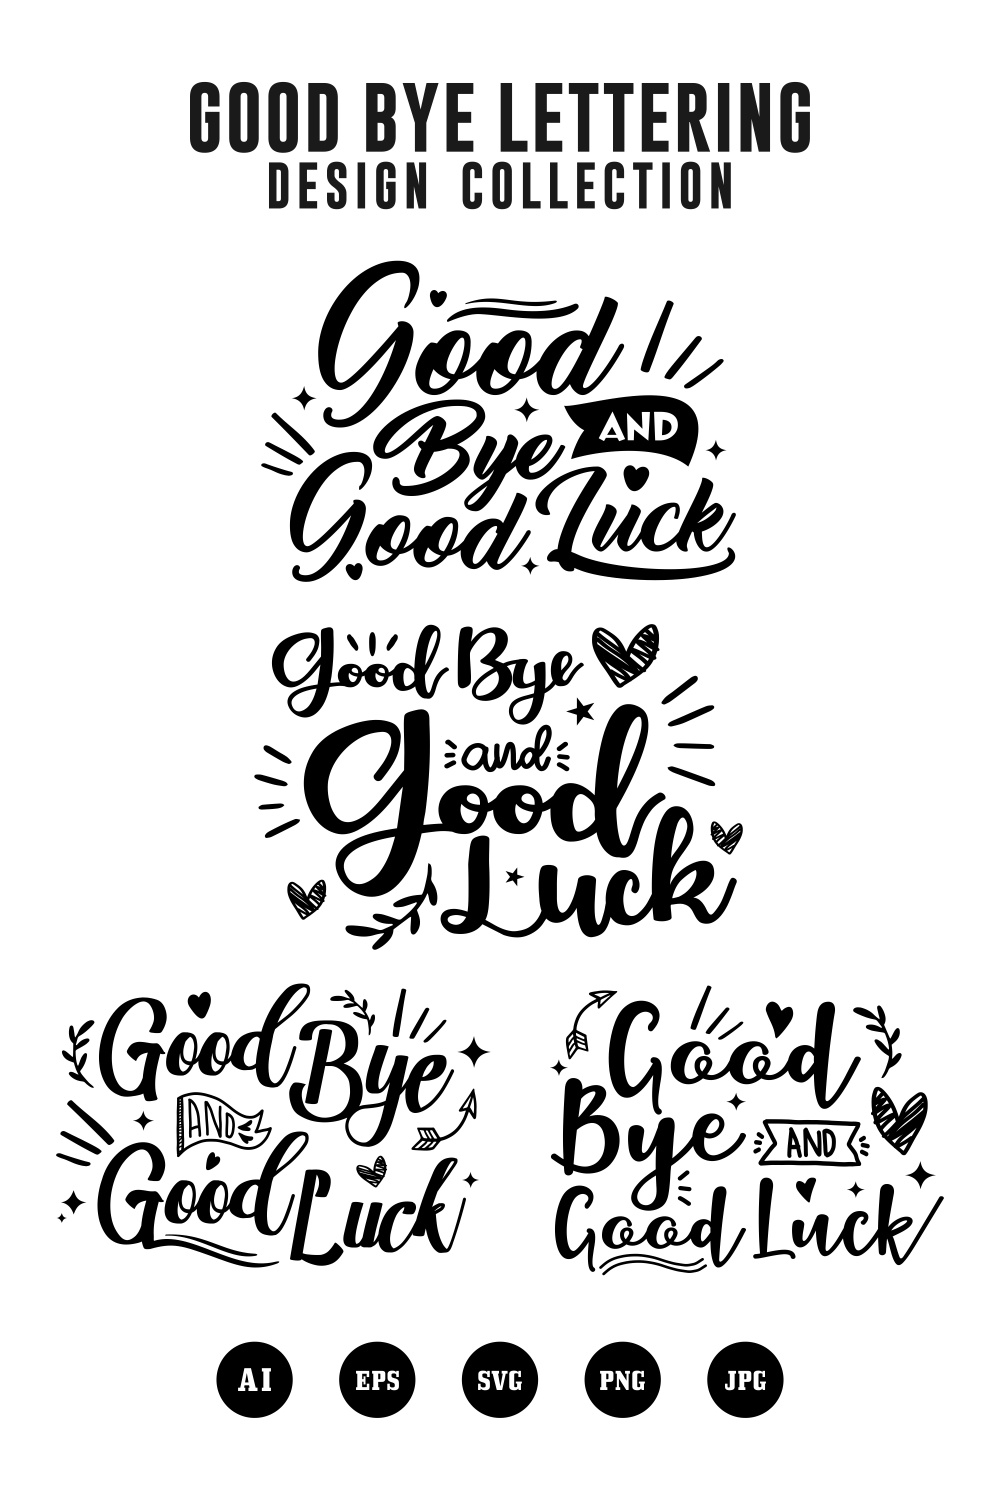 Set Good bye and Good Luck lettering collection - $6 pinterest preview image.